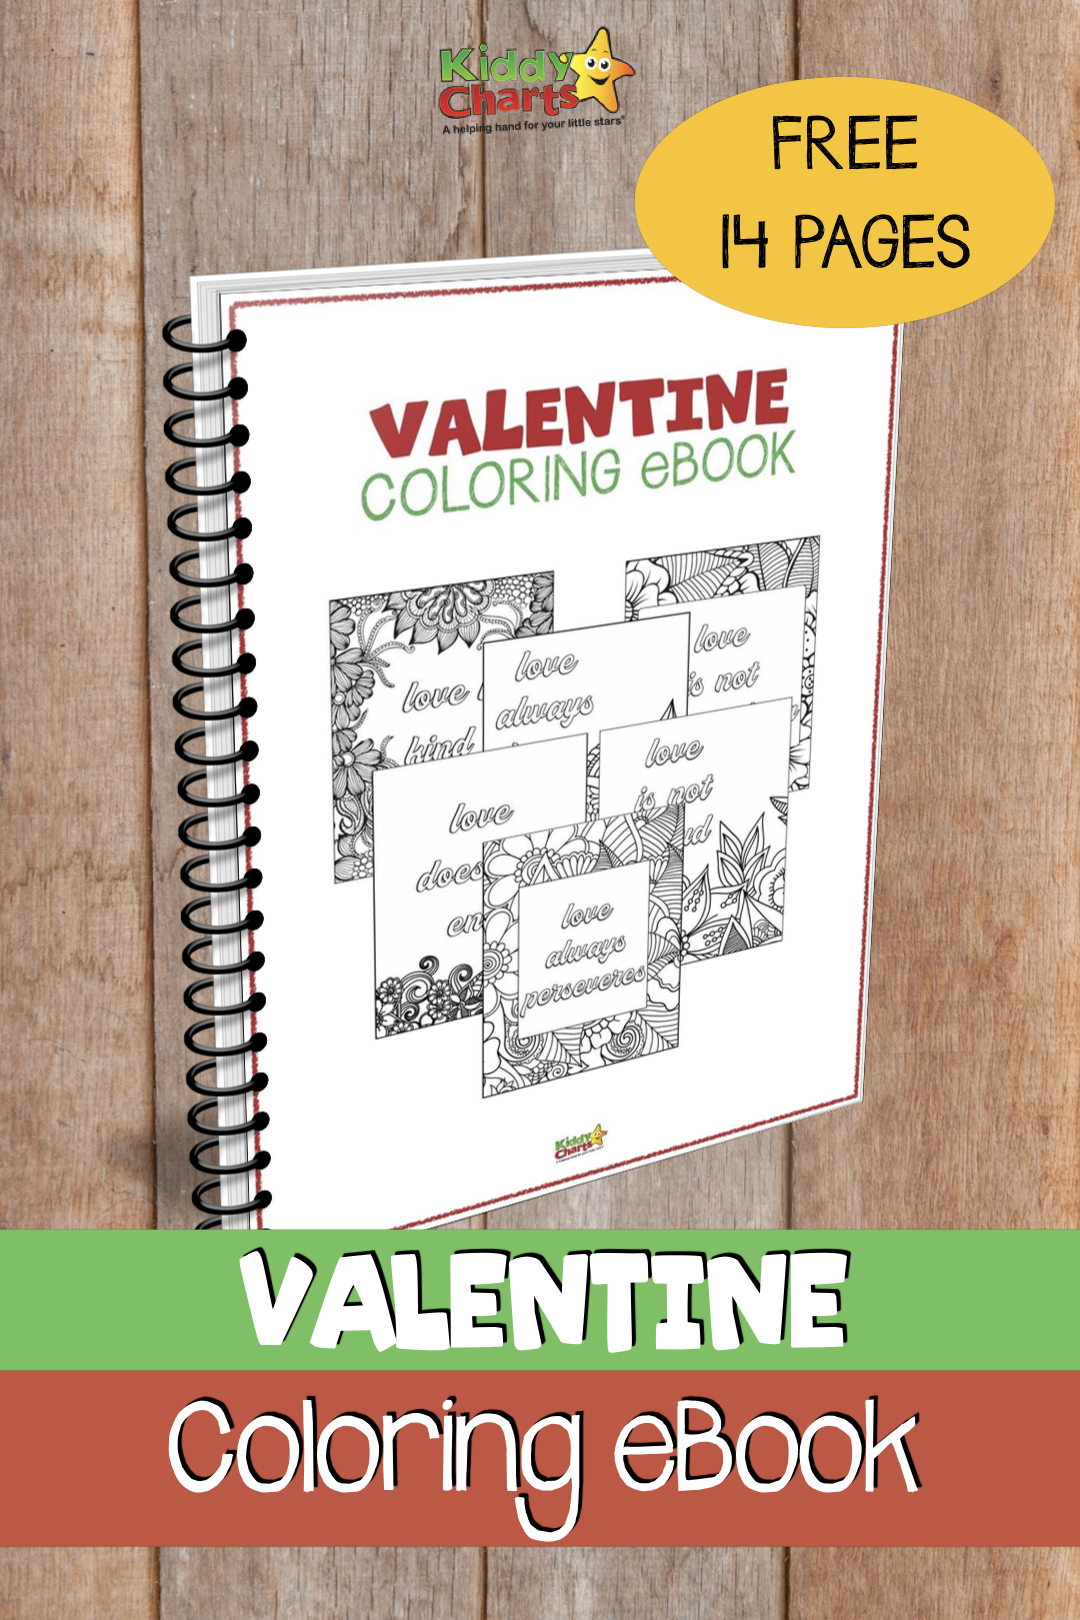 We have a lovely Valentines coloring book for you to download - check it out now! #valentinesday #love #coloring #valentines #ebooks